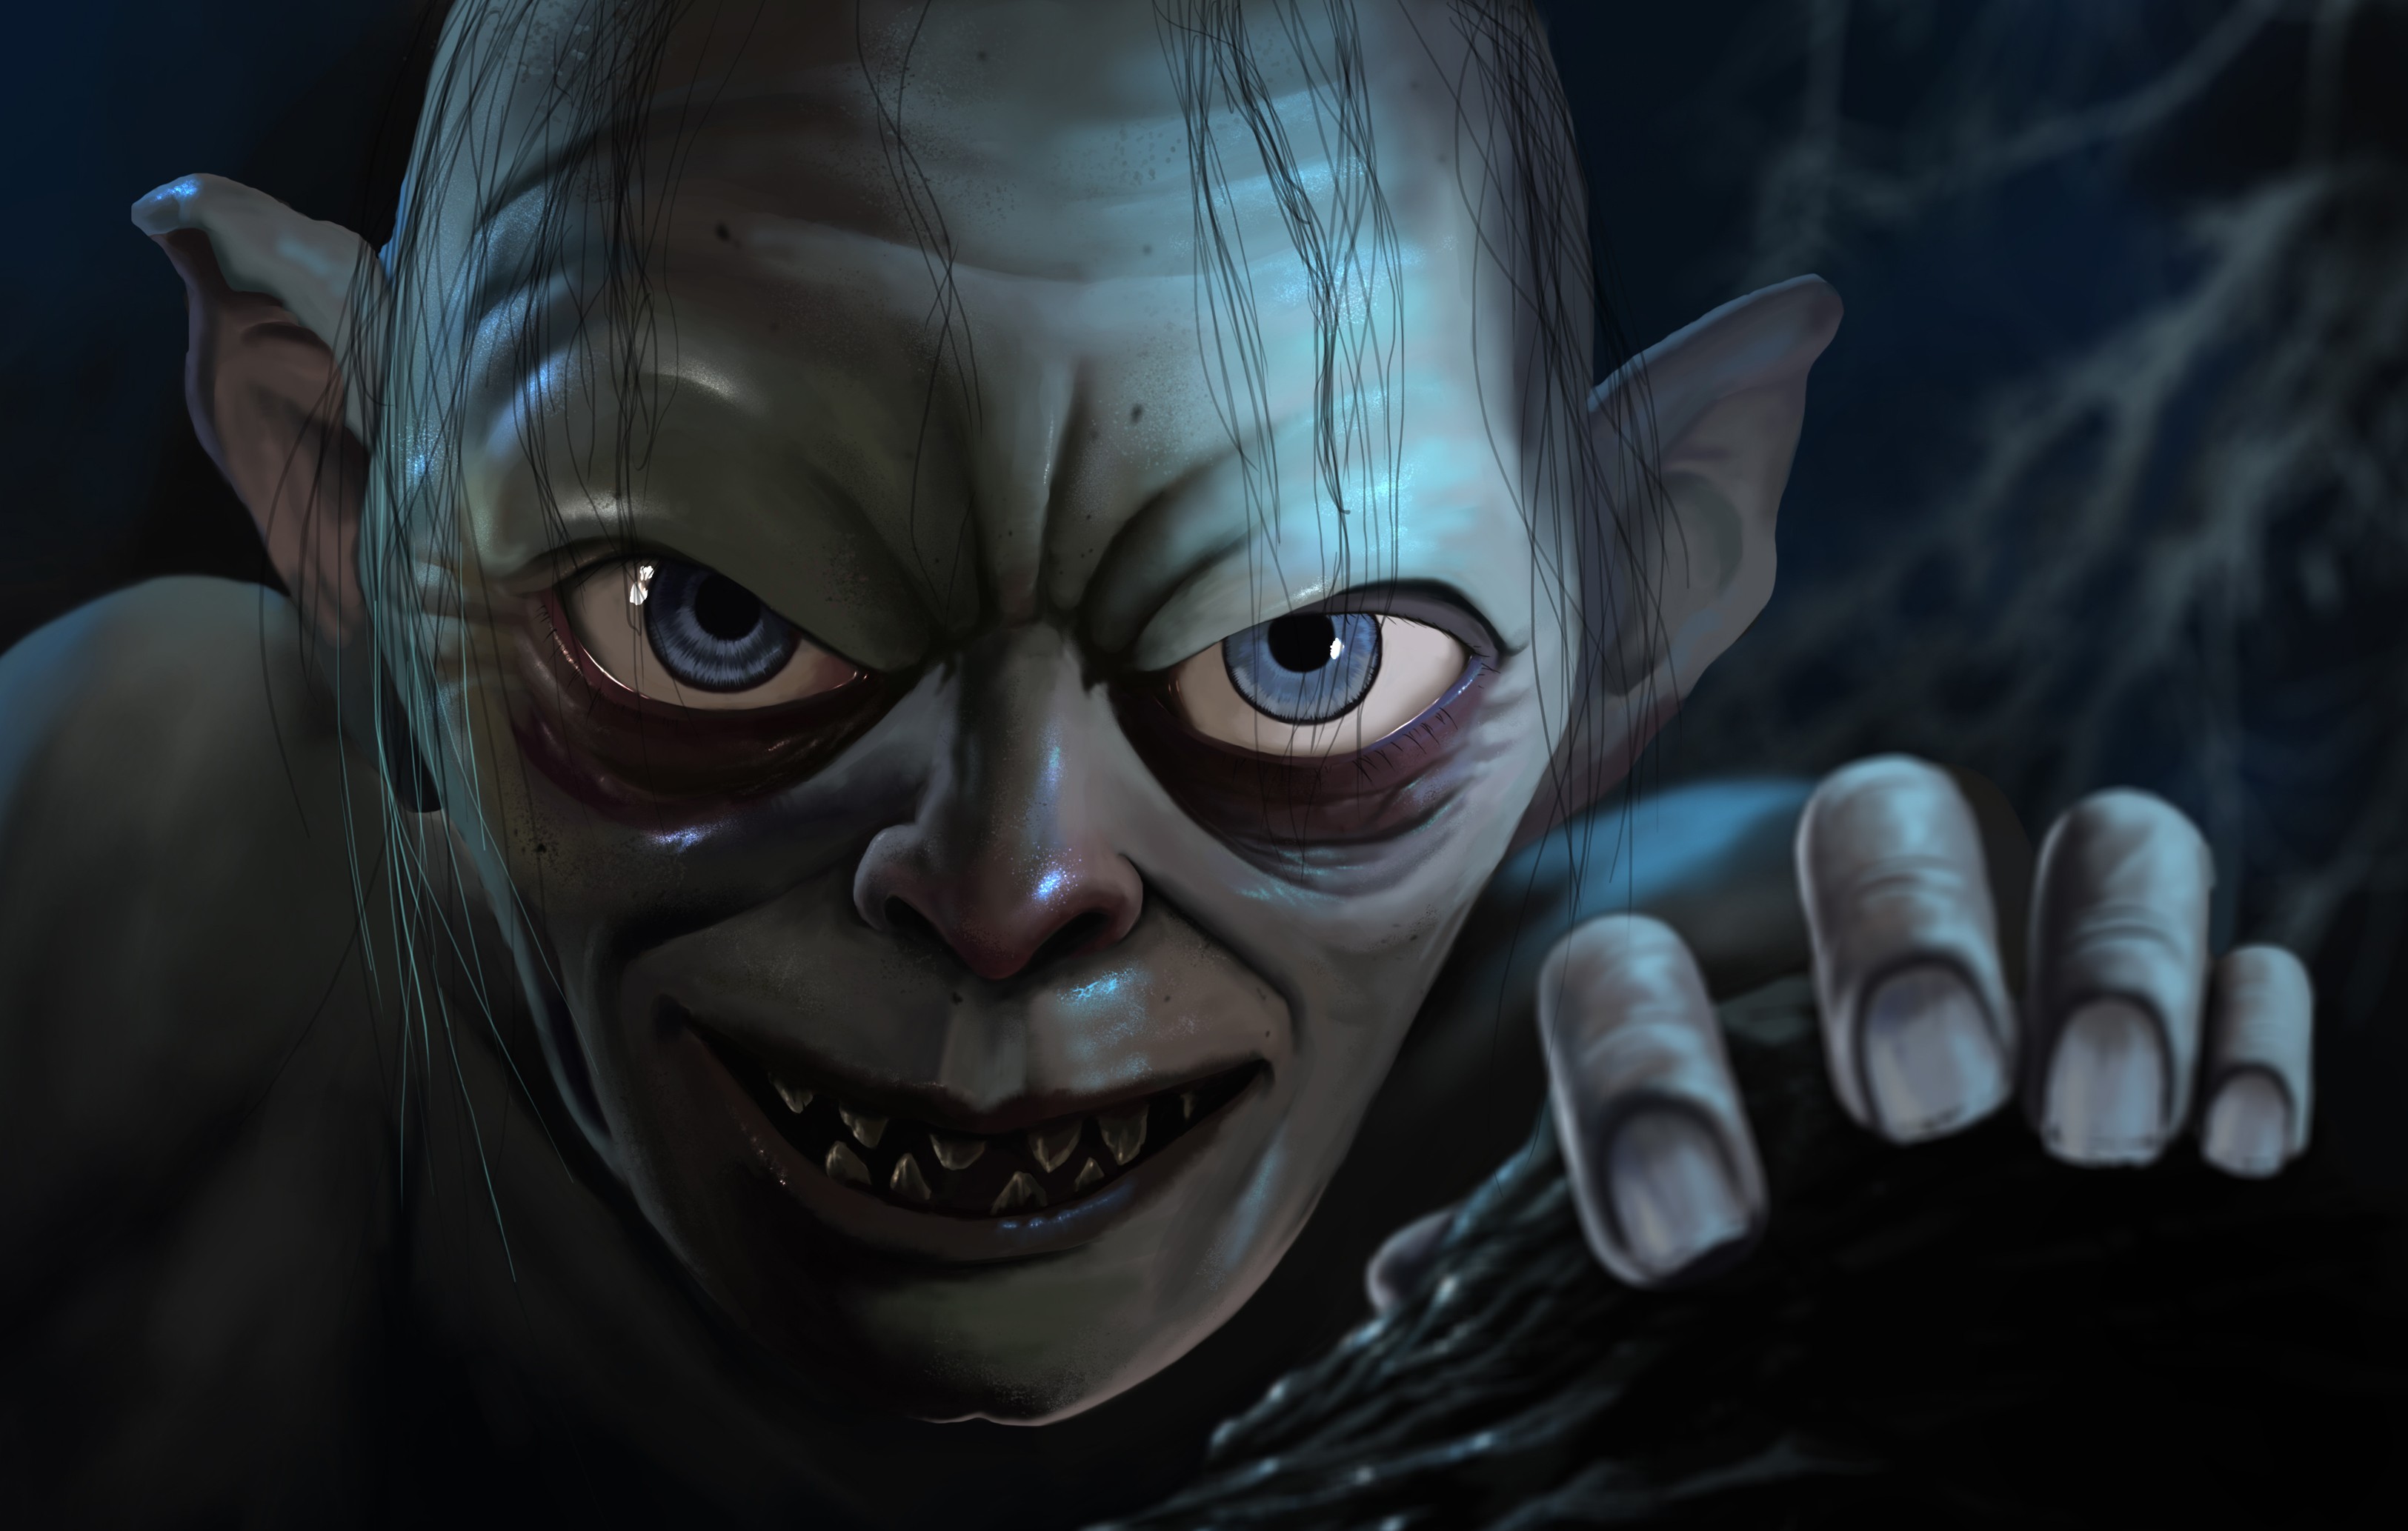 Gollum The Lord Of The Rings CGi Creature Smeagol Render Fantasy Art 3250x2067